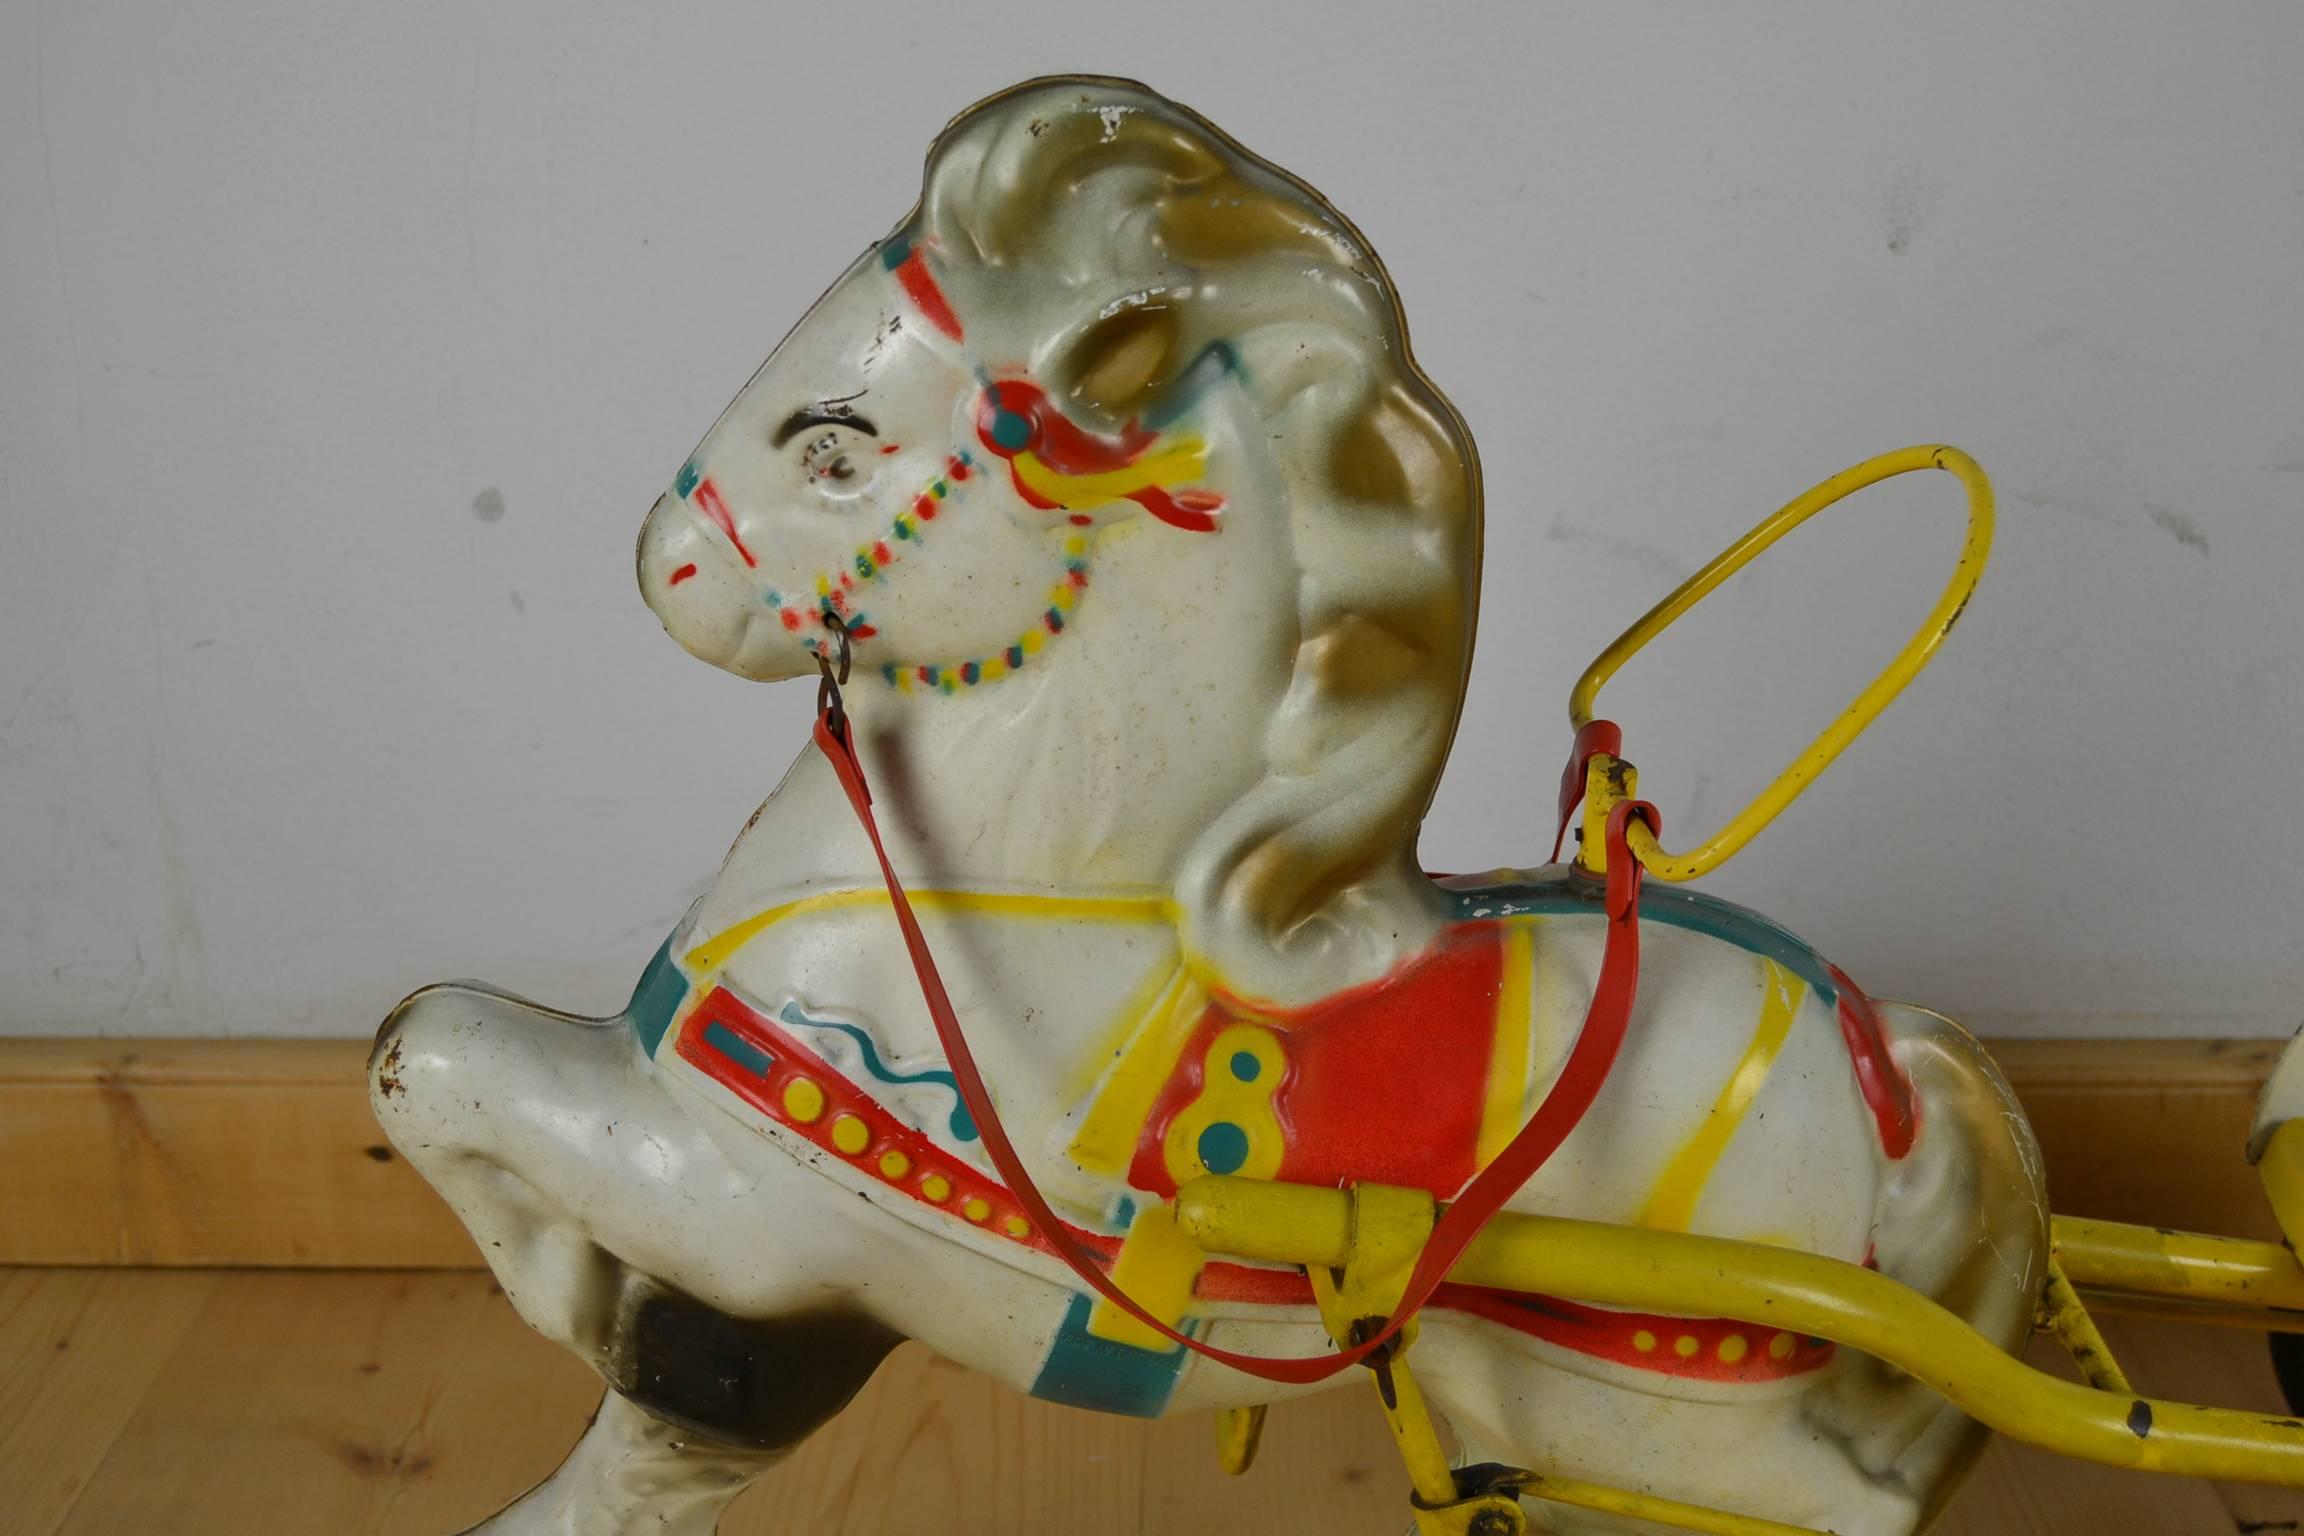 1960s vintage Mobo Toy - Sebel Mobo Toy, D. Sebel & co Erith Kent, England.
A pressed steel cute pony horse with a Carrey Trailer.
This Child's ride on toy - pedal toy is in original condition, never repainted.
Comparable with the vintage Mobo